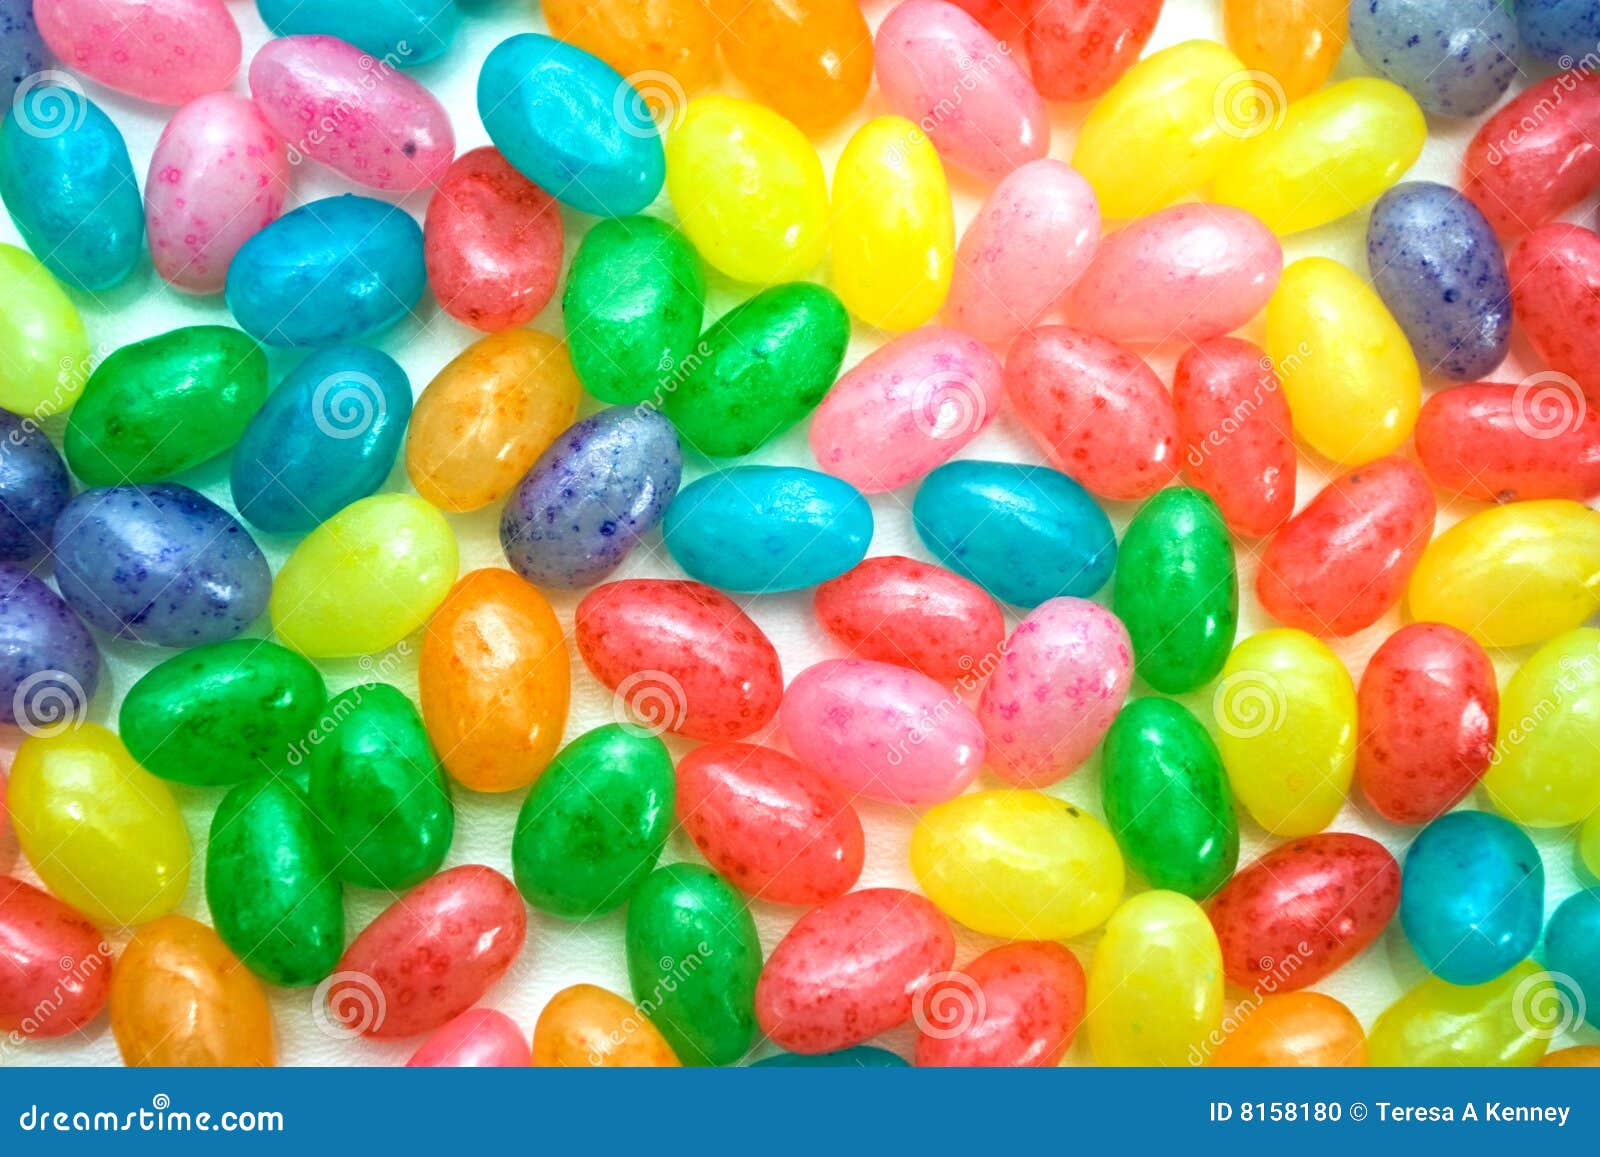 brightly colored jelly beans